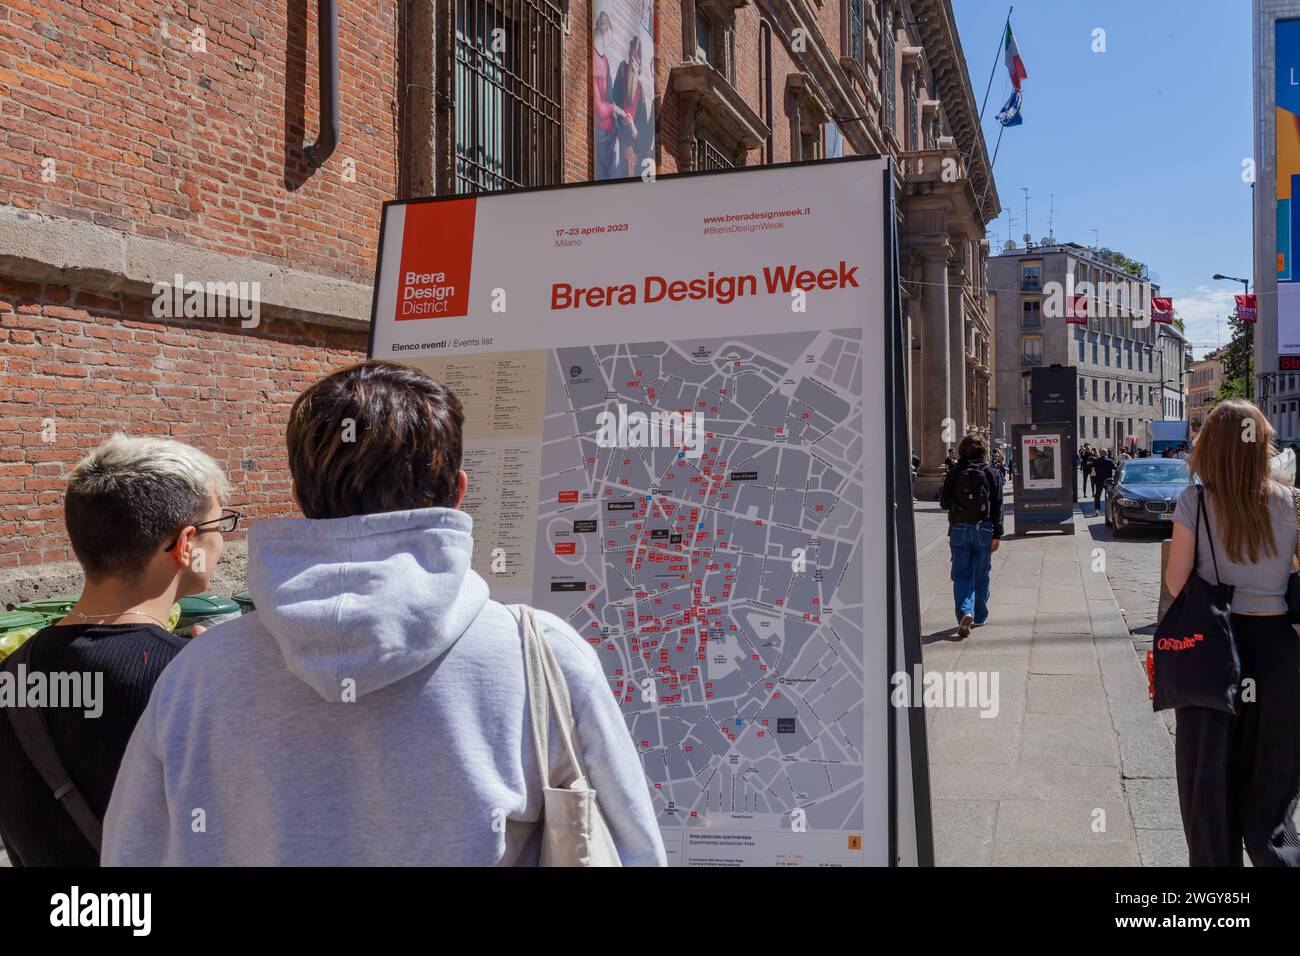 MILAN, ITALY- 04 17 2023: Visitors observing the design week map in the Brera district in the historic center of Milan Stock Photo